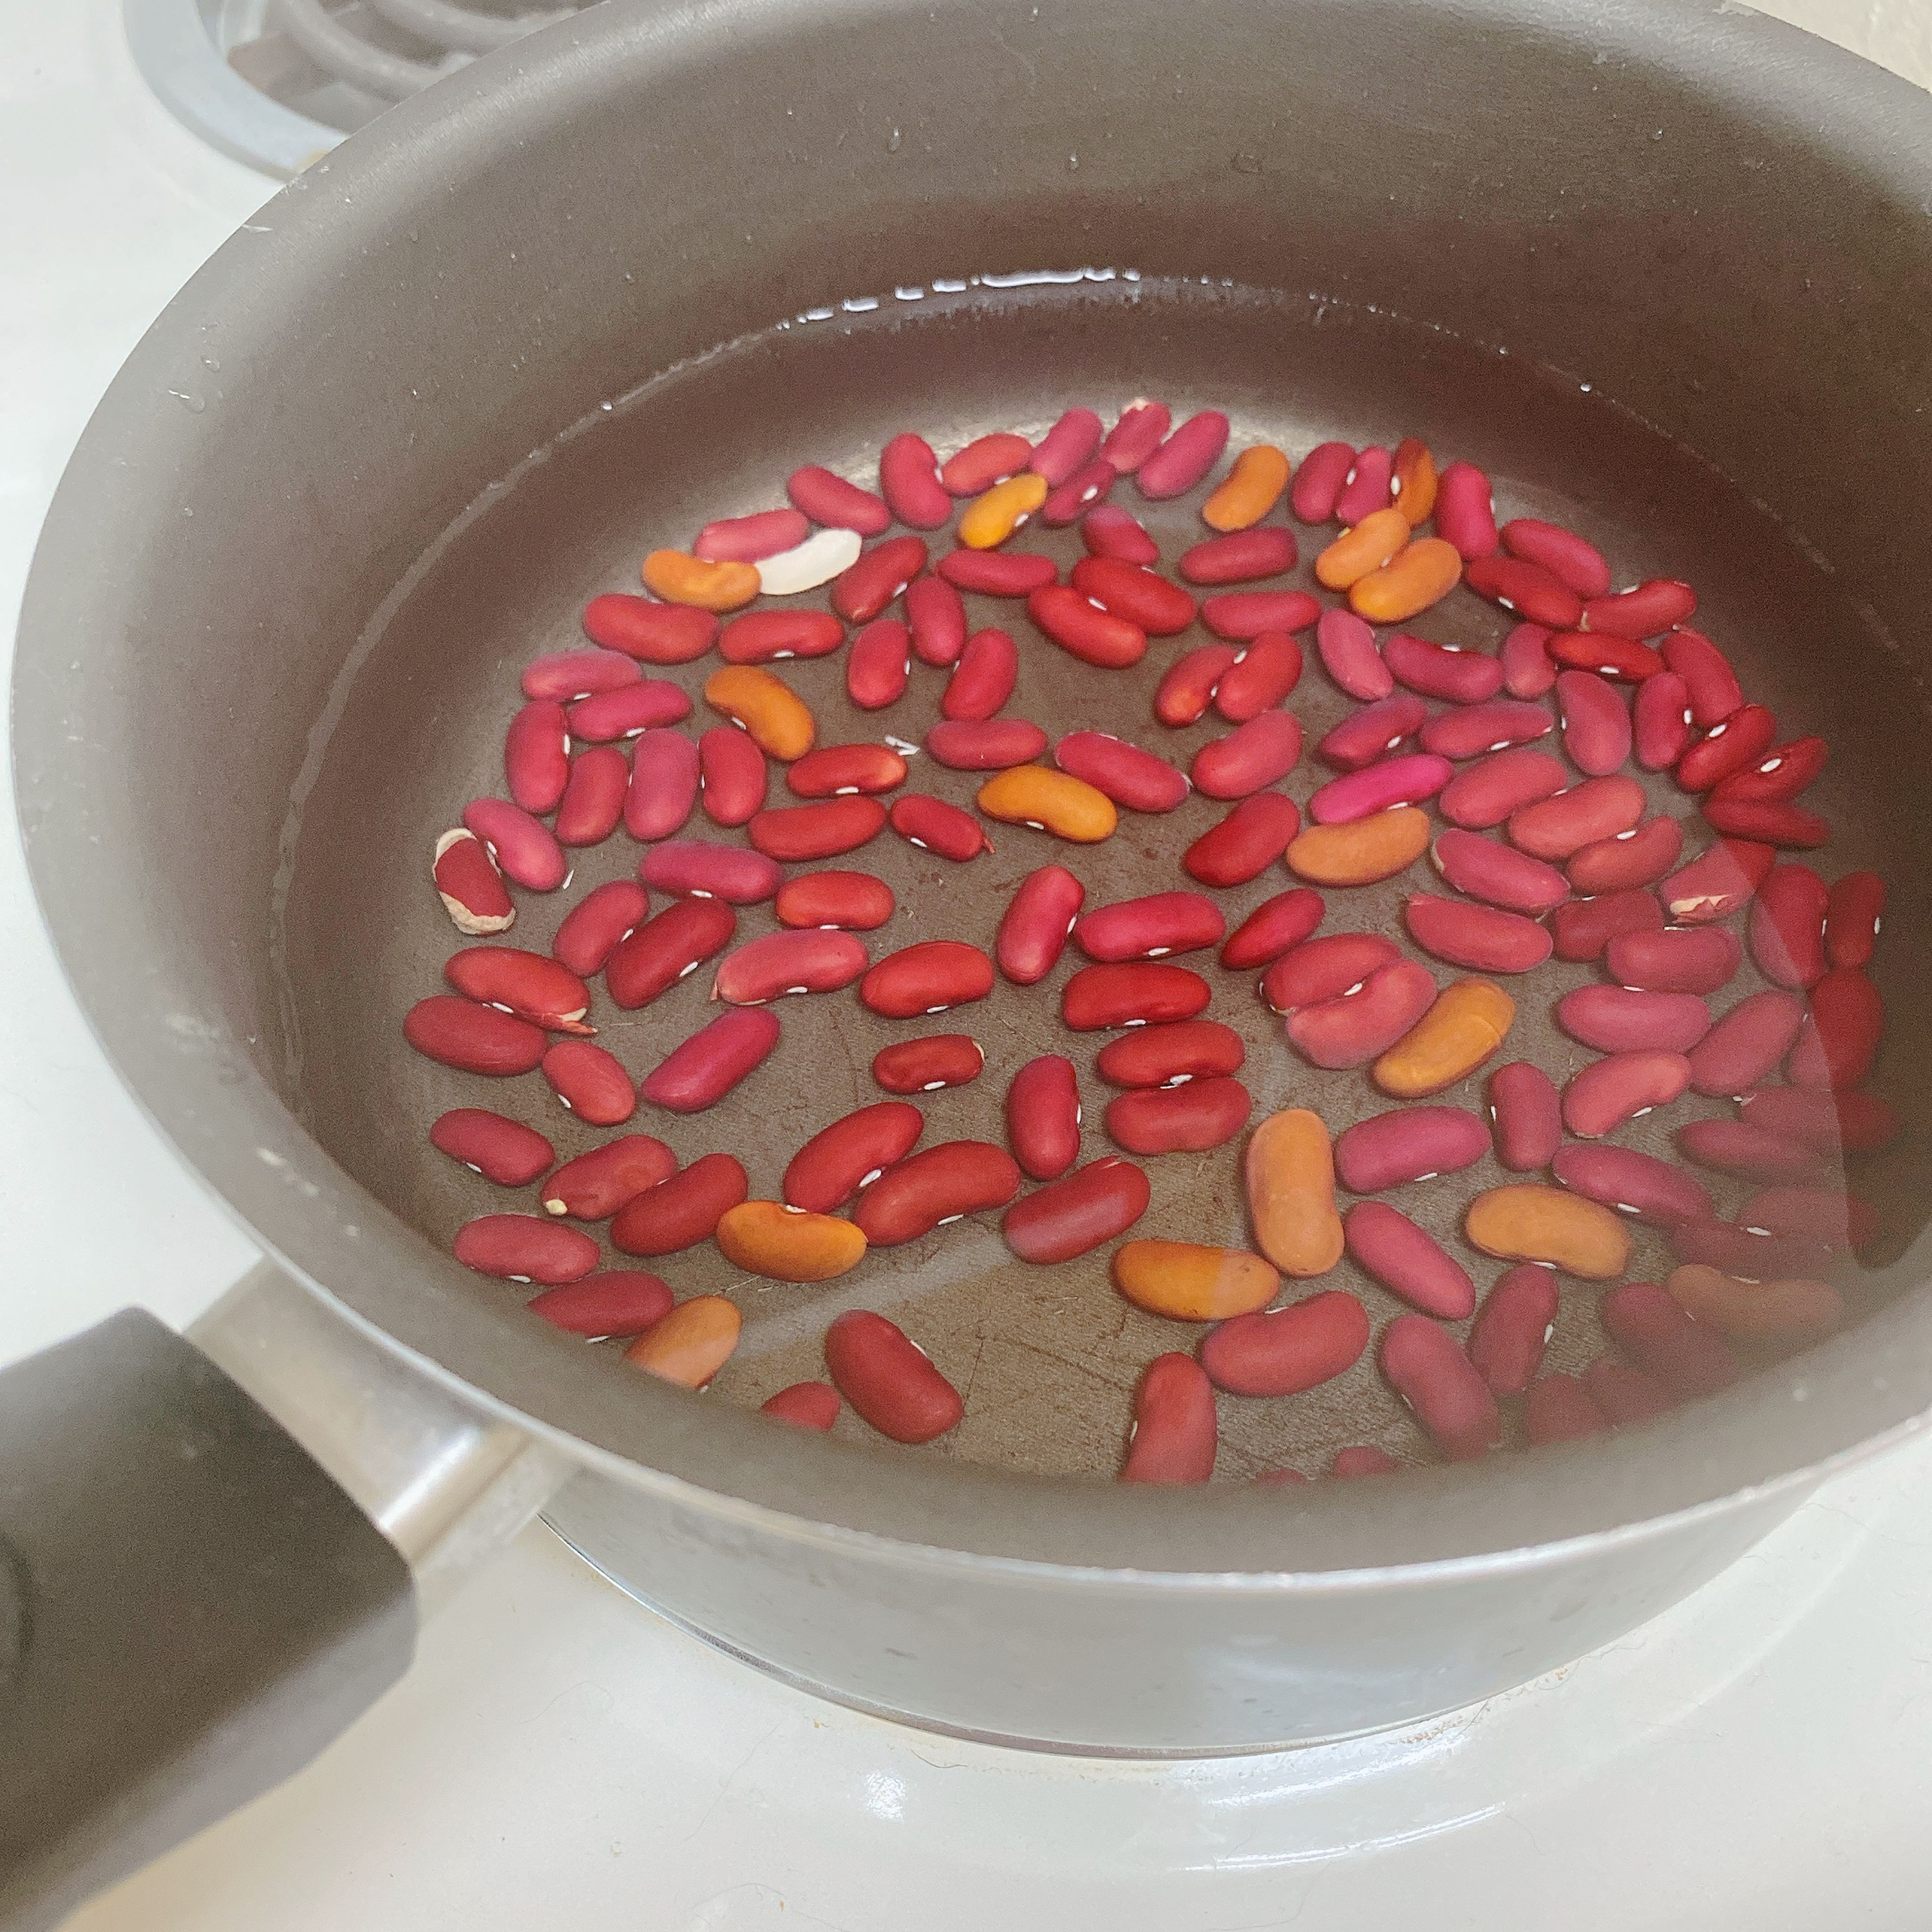 Rinse the kidney beans and then soak them in water for 2-3 hours.